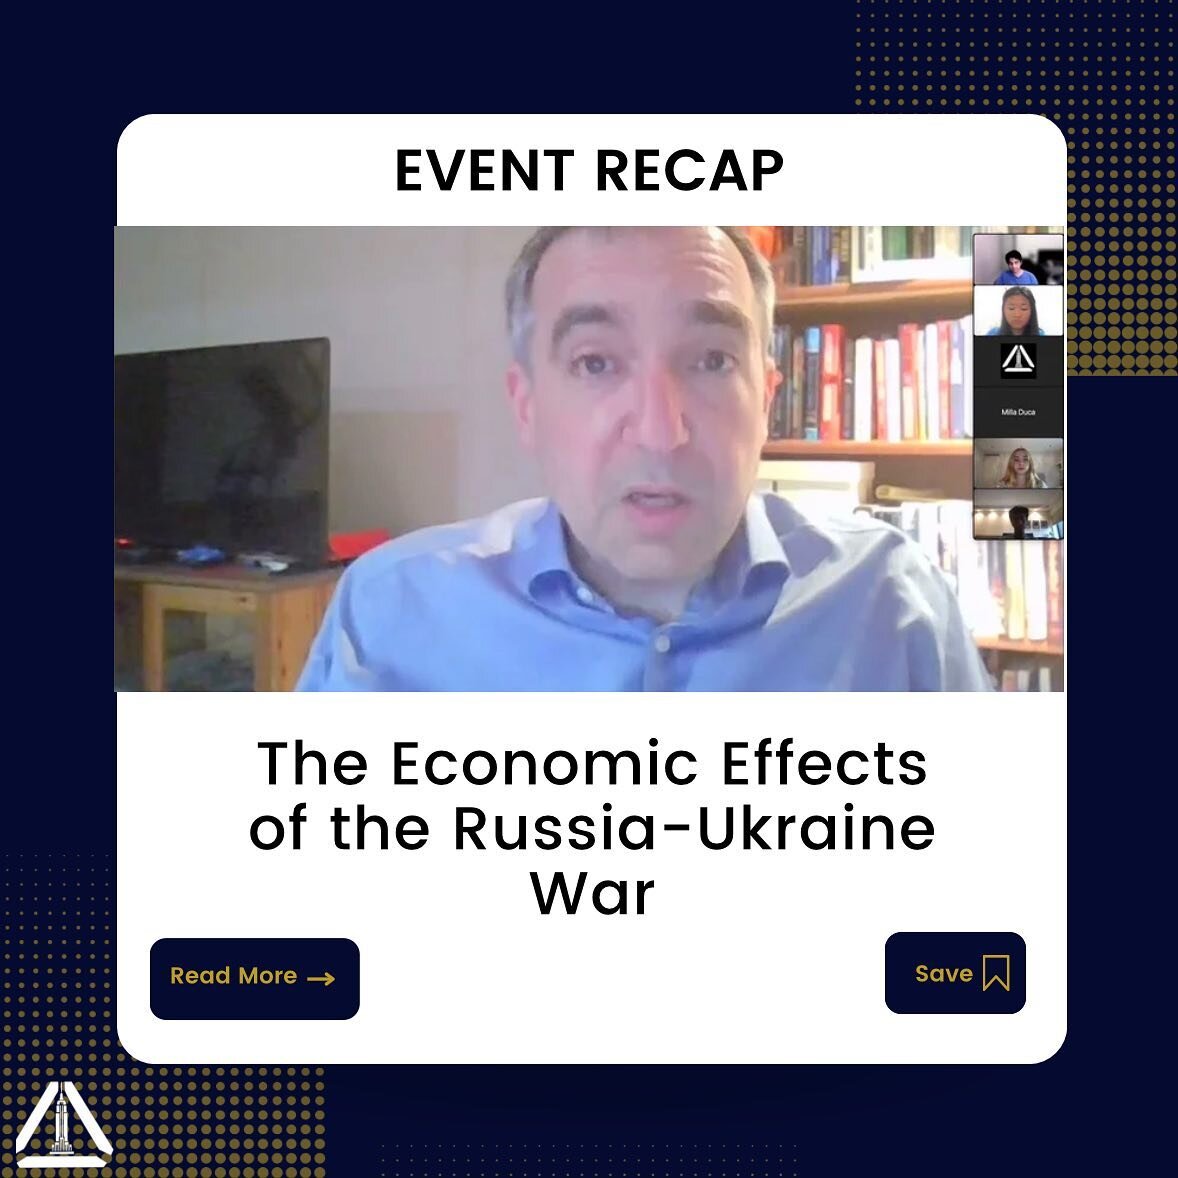 Thank you to the many members who attended our talk today with Mr. Spencer Jakab on the Economic Effects of the Russia-Ukraine War. Today, Mr. Jakab is an editor of Heard on the Street at The Wall Street Journal, though previously he had written for 